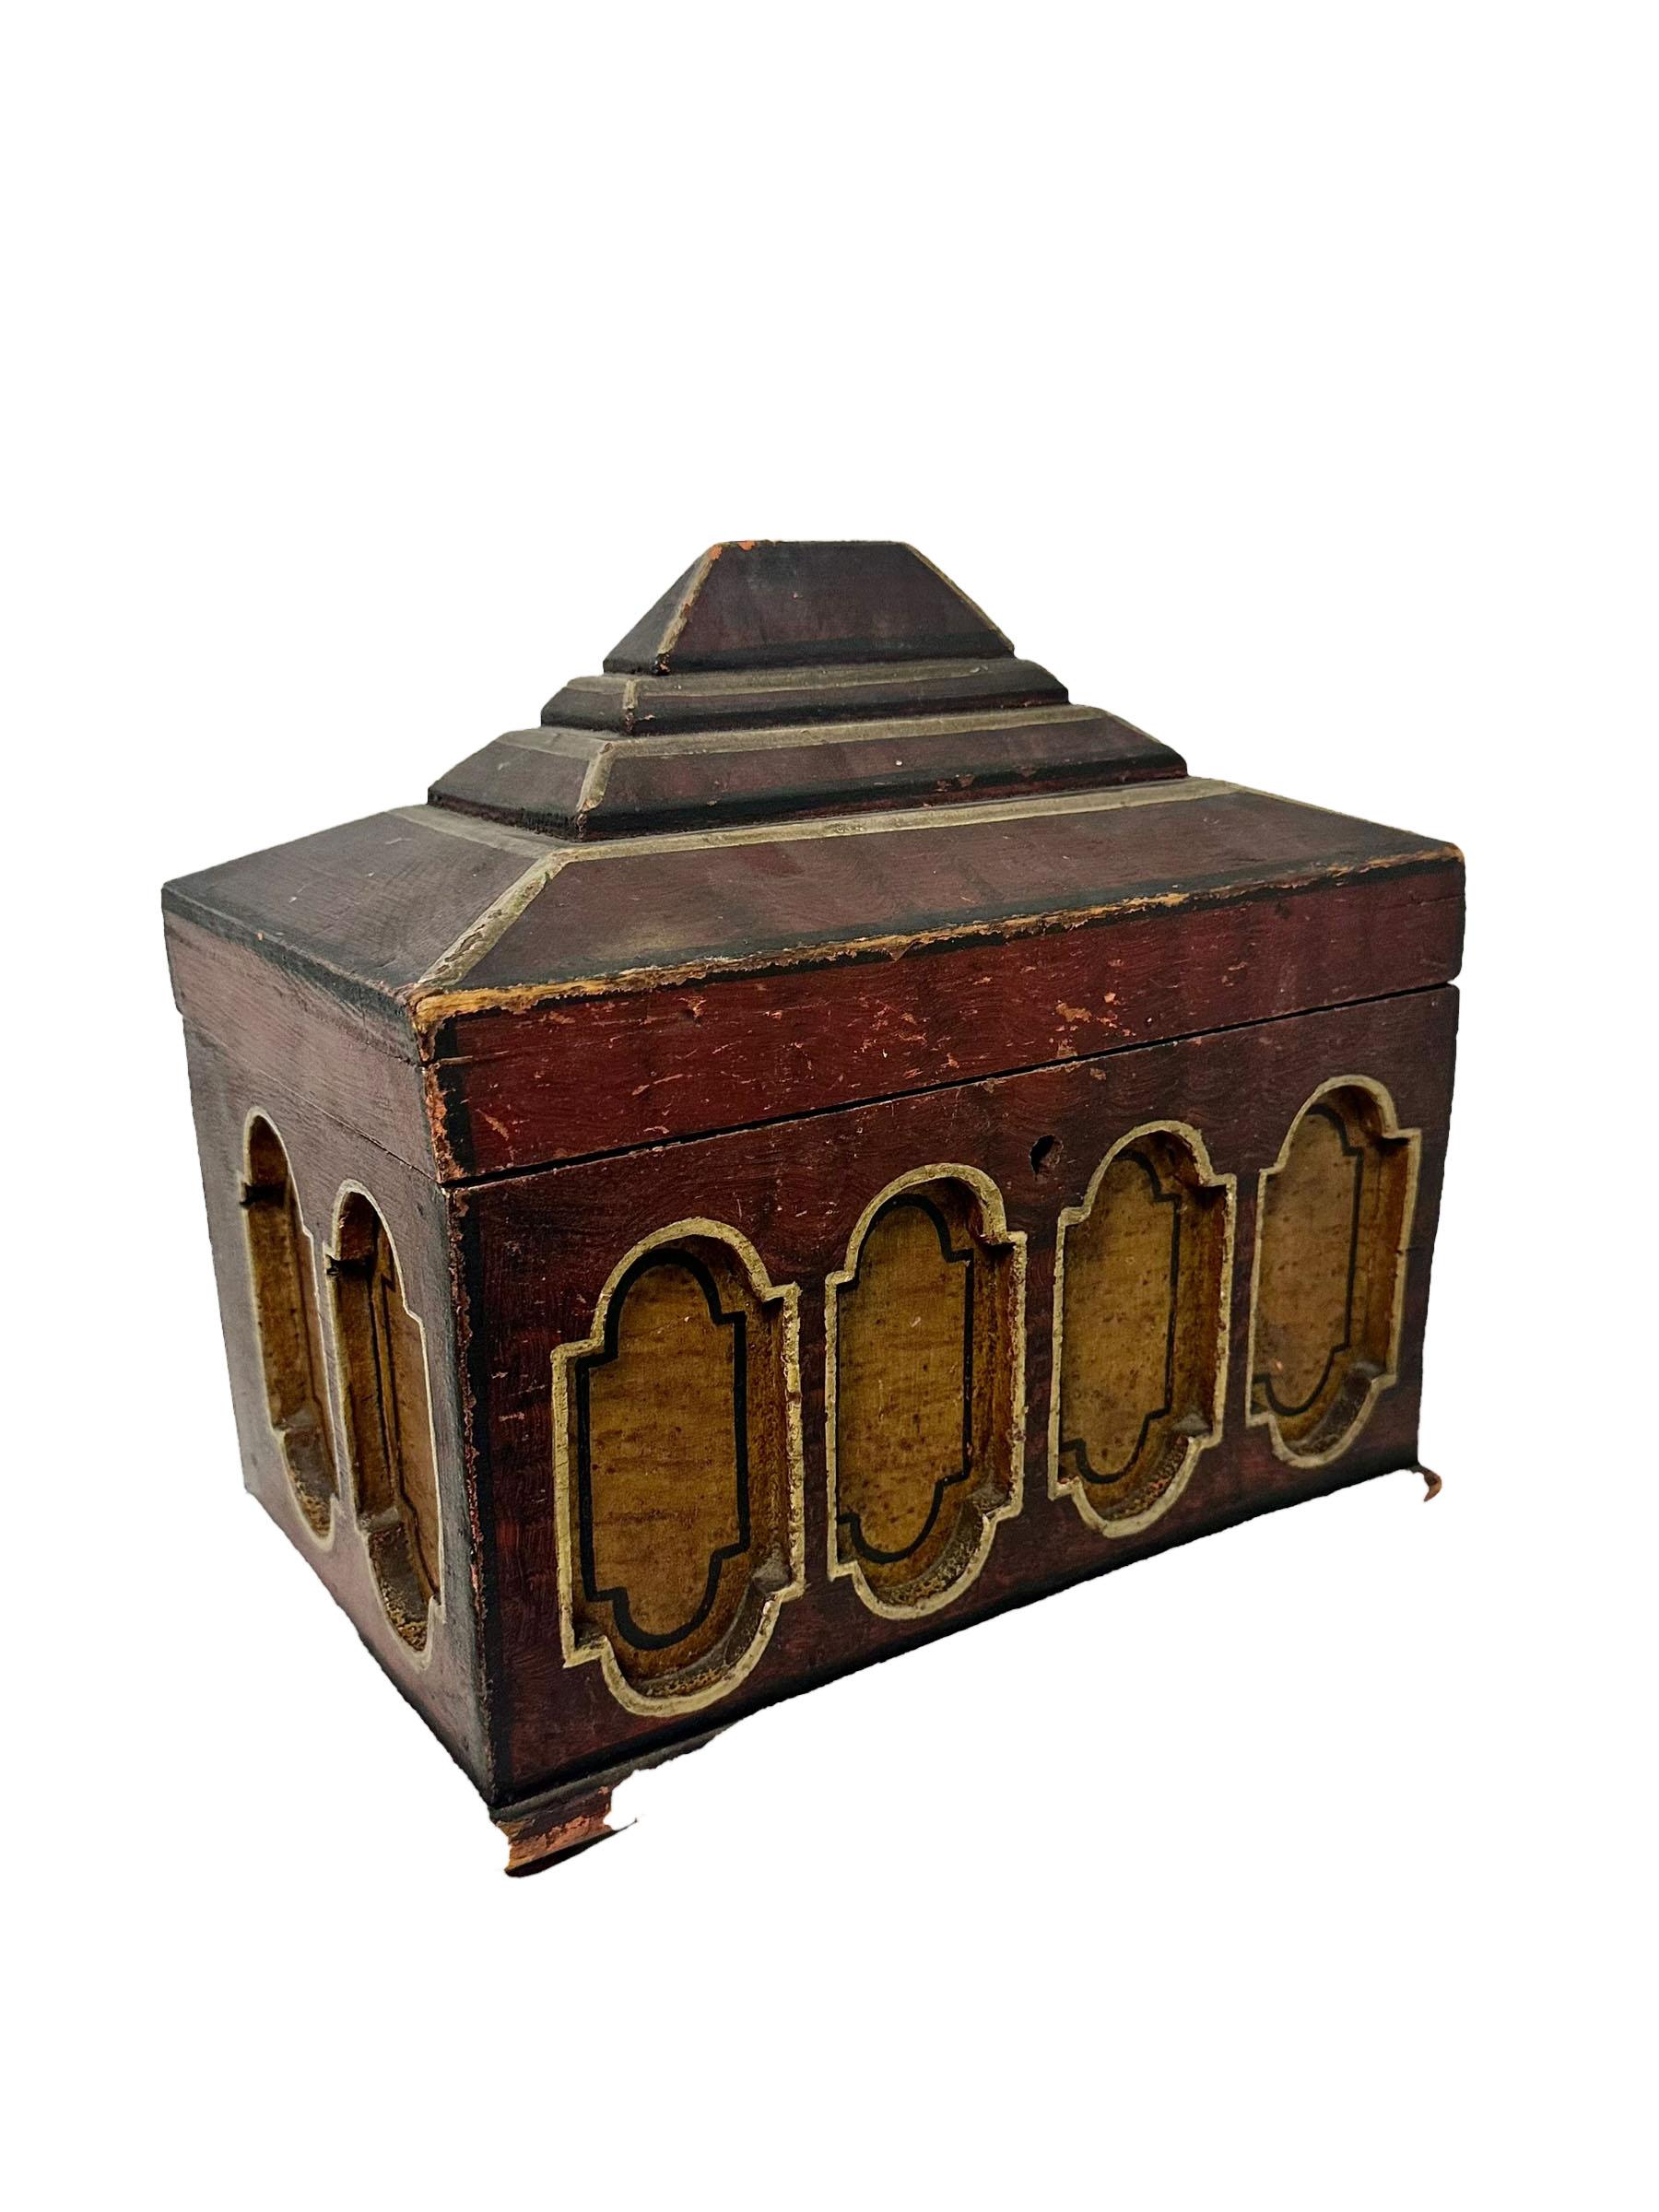 19th century Anglo Indian box with raised painted arches on front, fantastic with a lot of patina. Does not have a key has small button feet. 